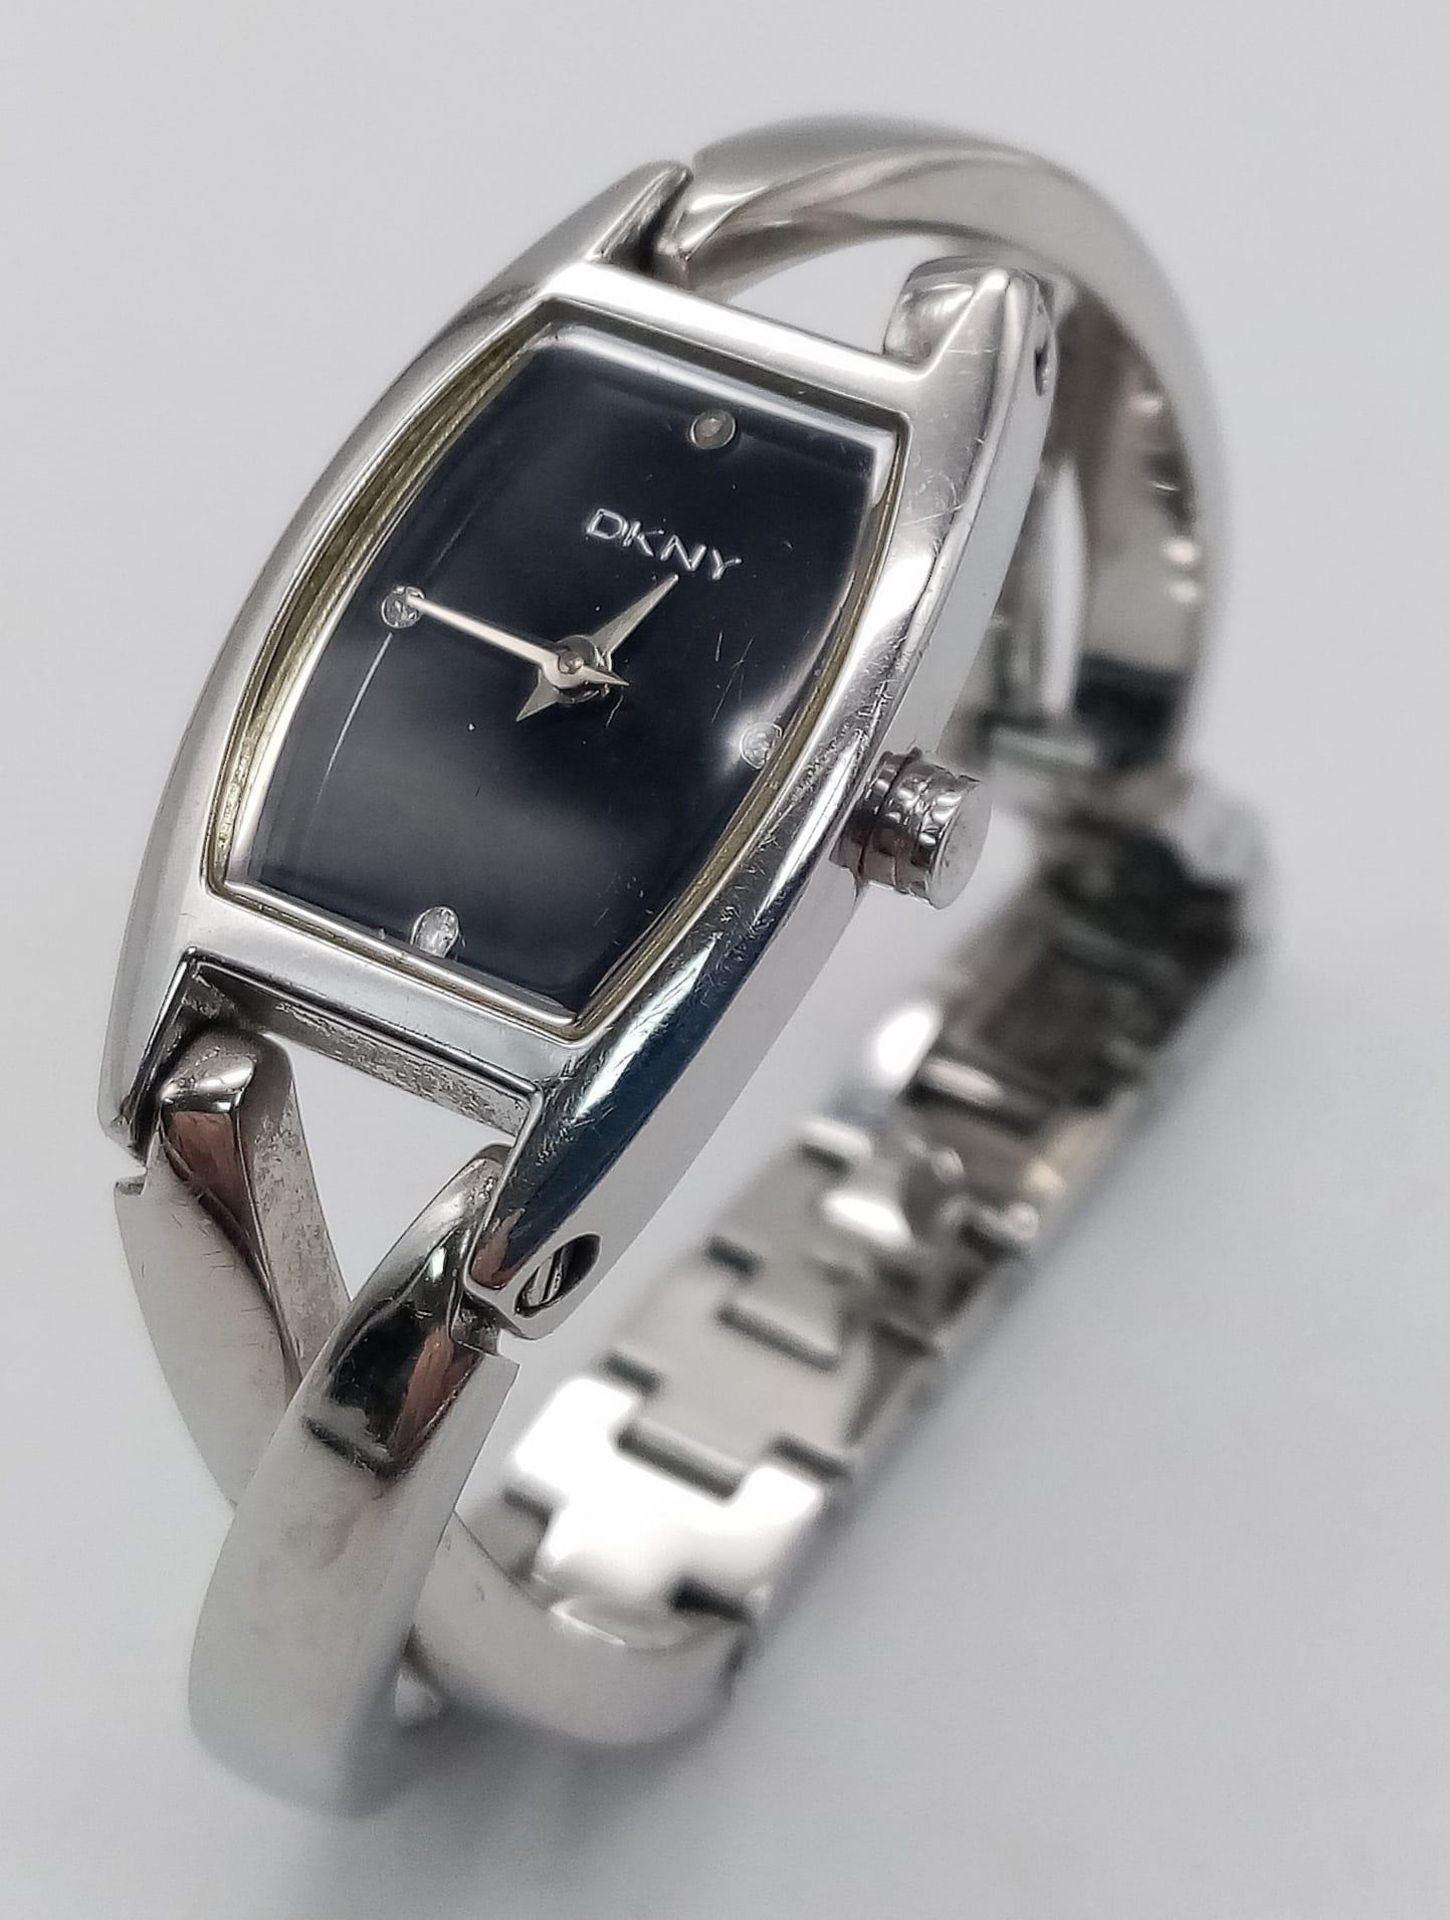 A Designer DKNY Quartz Ladies Watch Stainless steel bracelet and case - 18mm. Black dial. In working